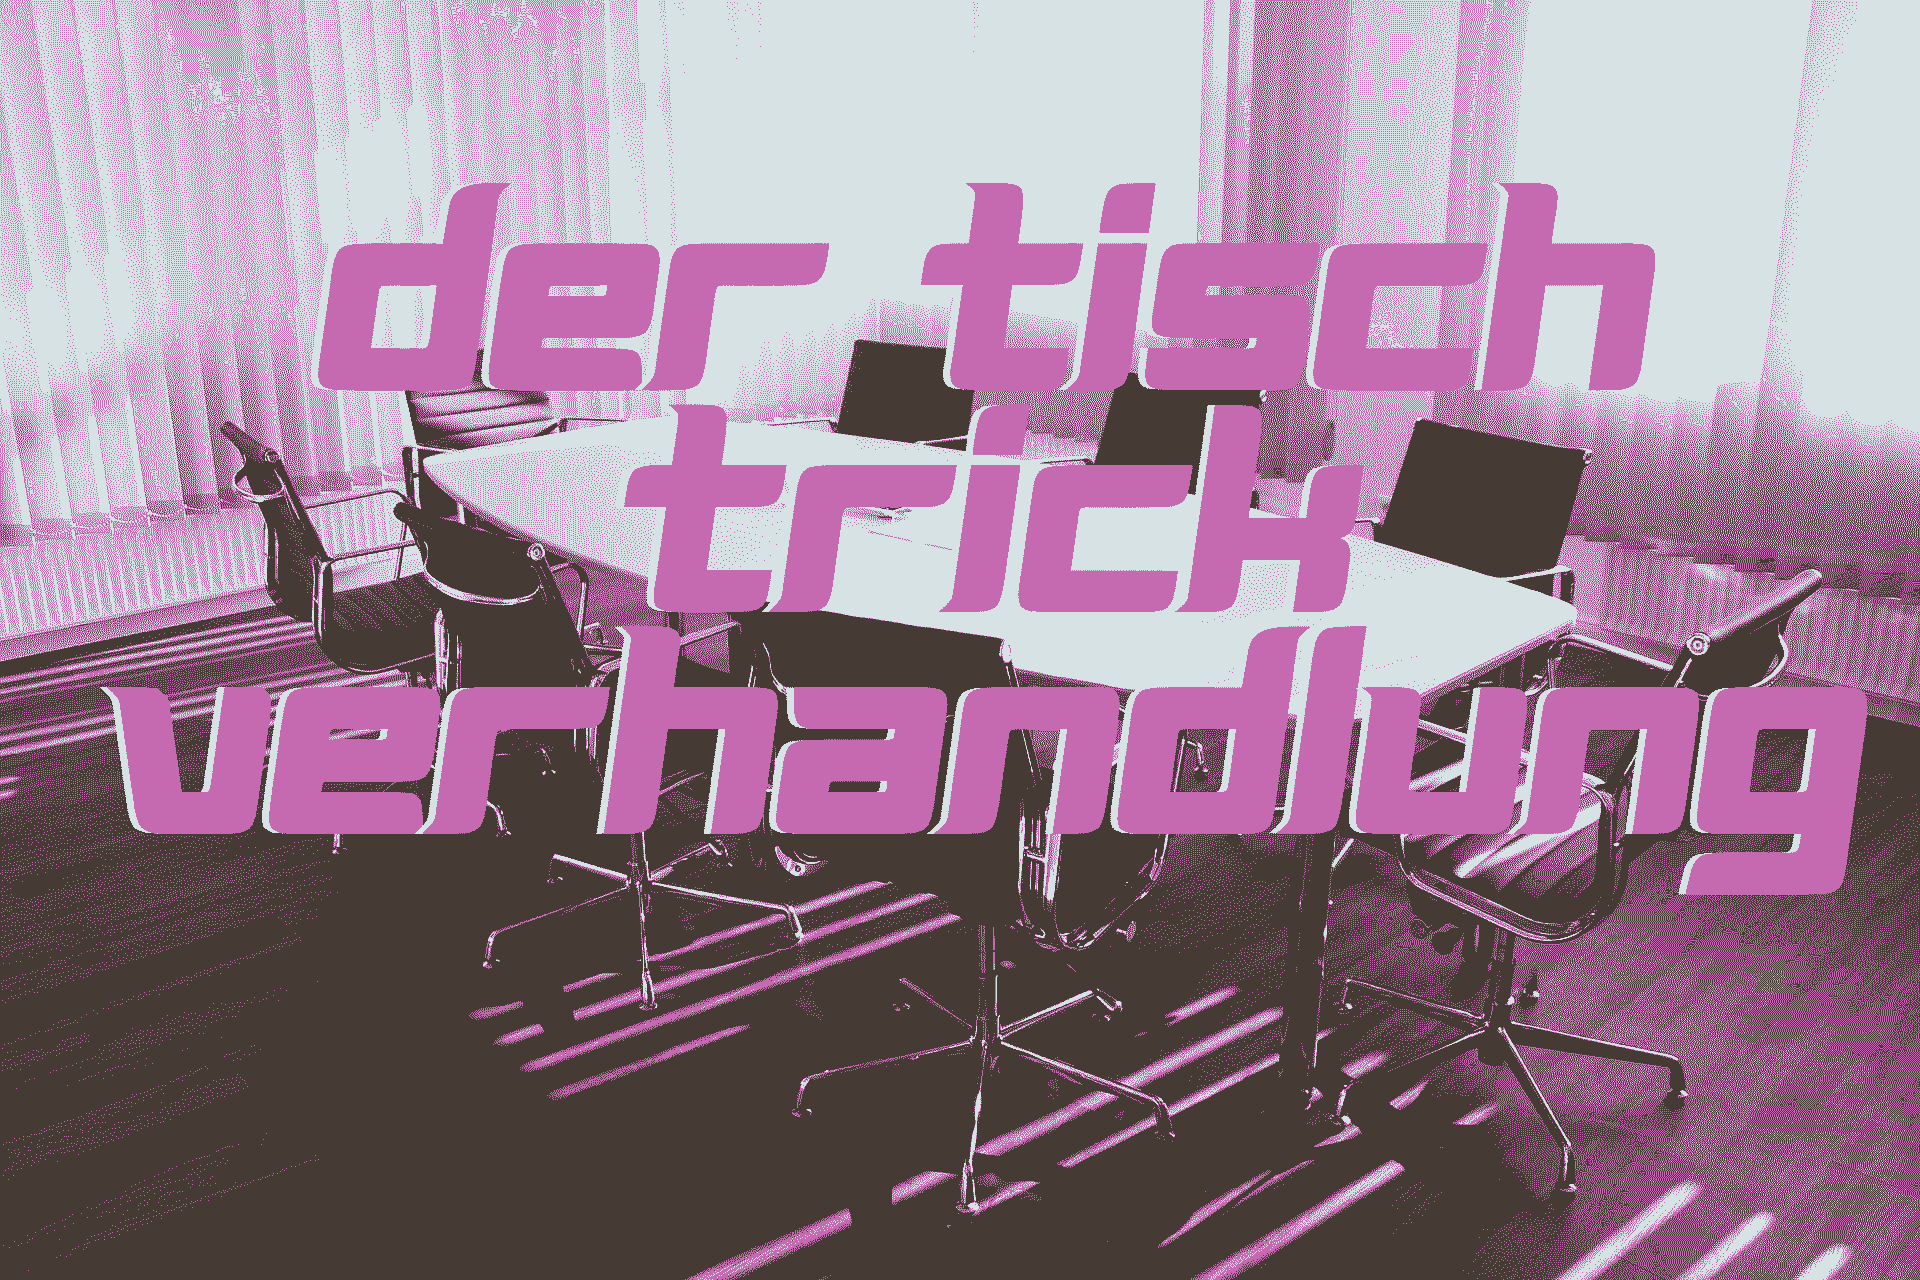 You are currently viewing Tisch Trick Verhandlung